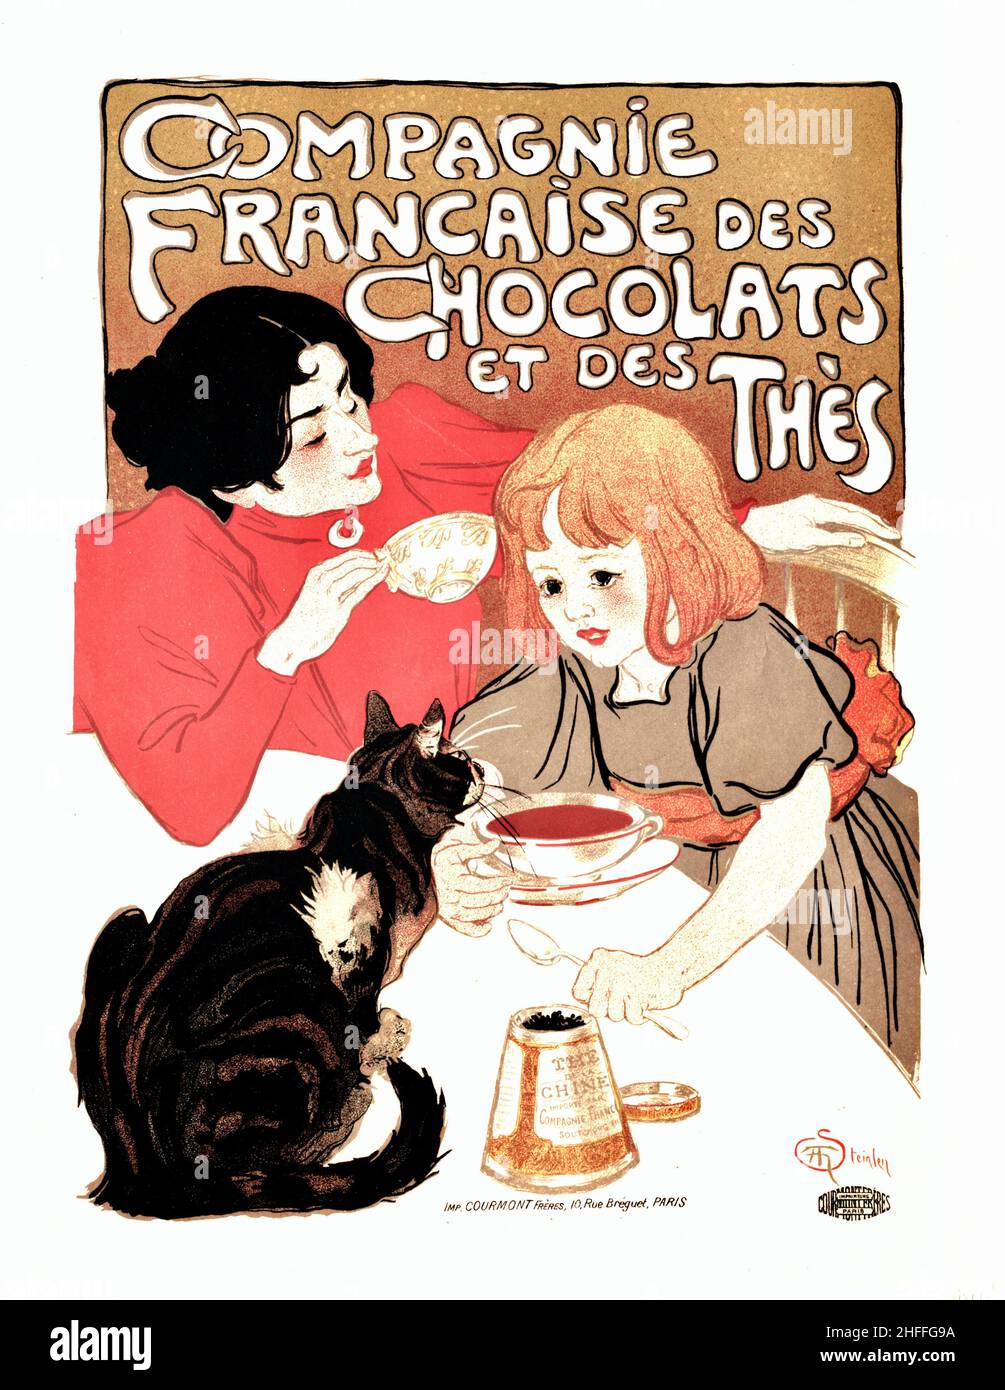 Théophile Steinlen poster design for Compagnie Française des Chocolats et des Thès. The poster features the artists wife and daughter. Stock Photo